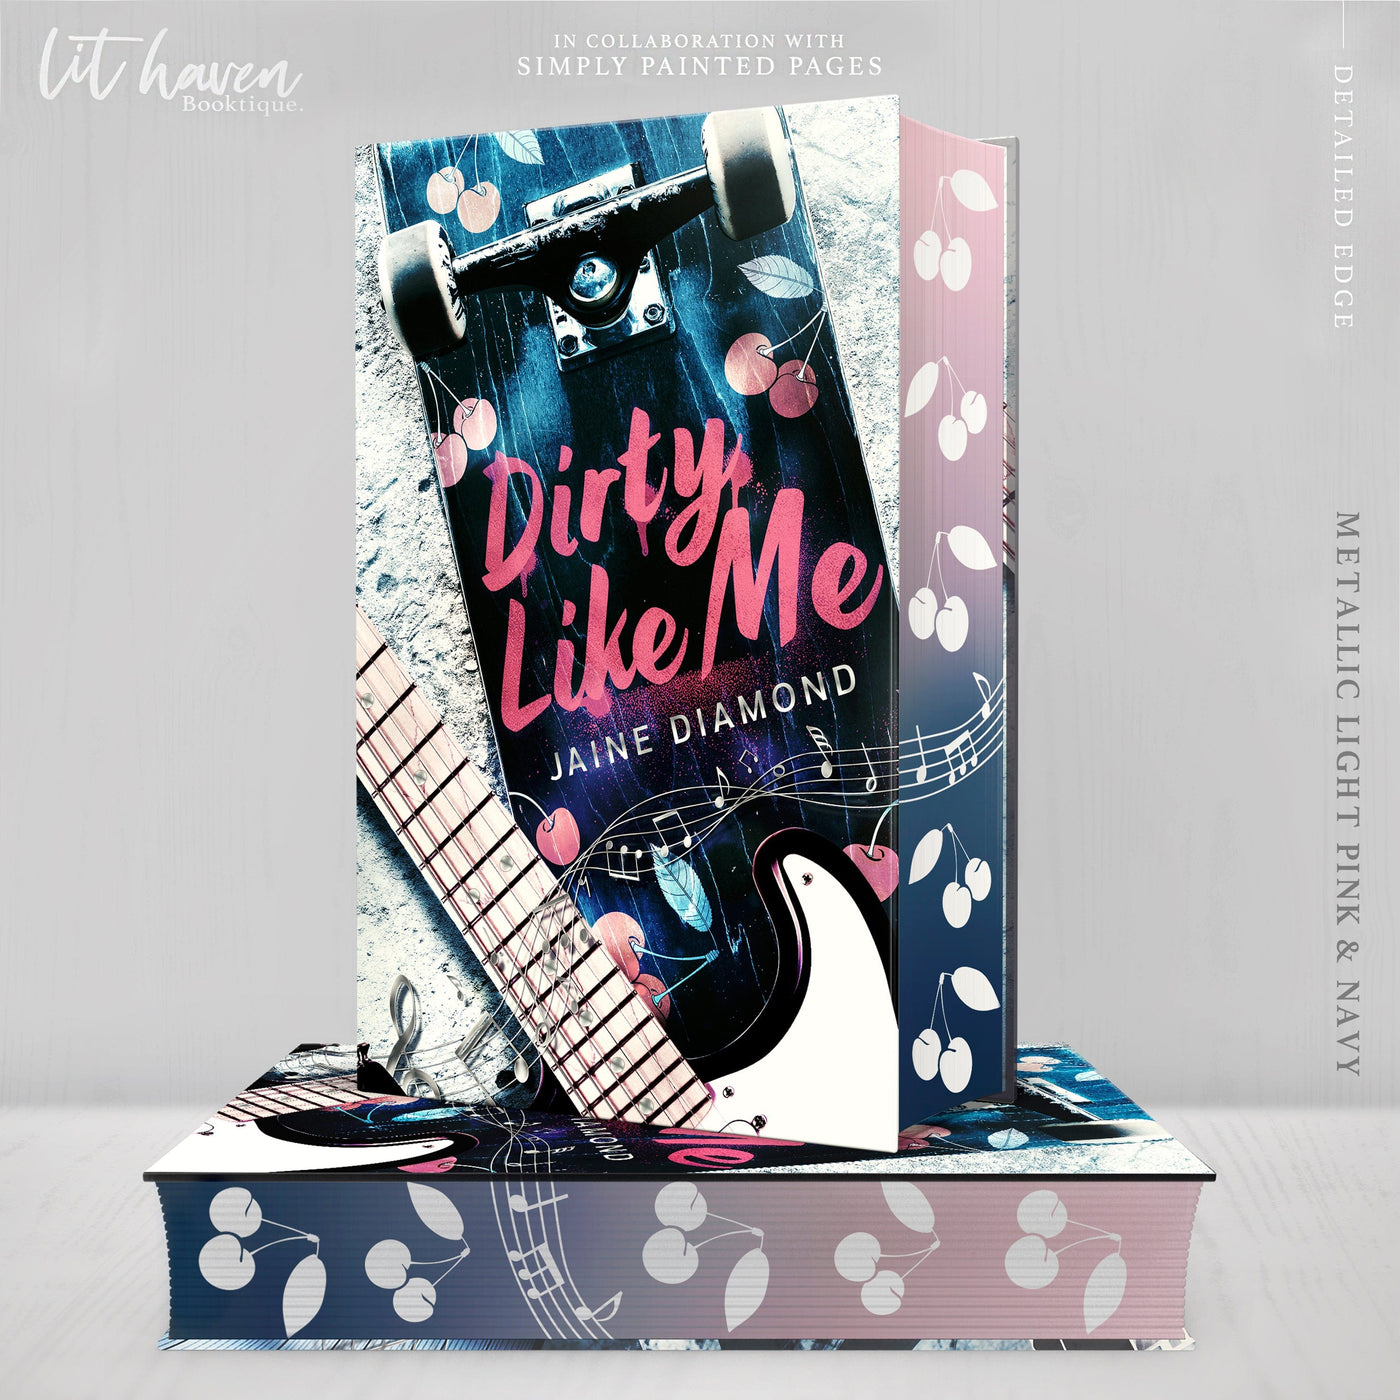 Lit Haven Booktique Book Waitlist - Dirty Like Me Exclusive Hardcover